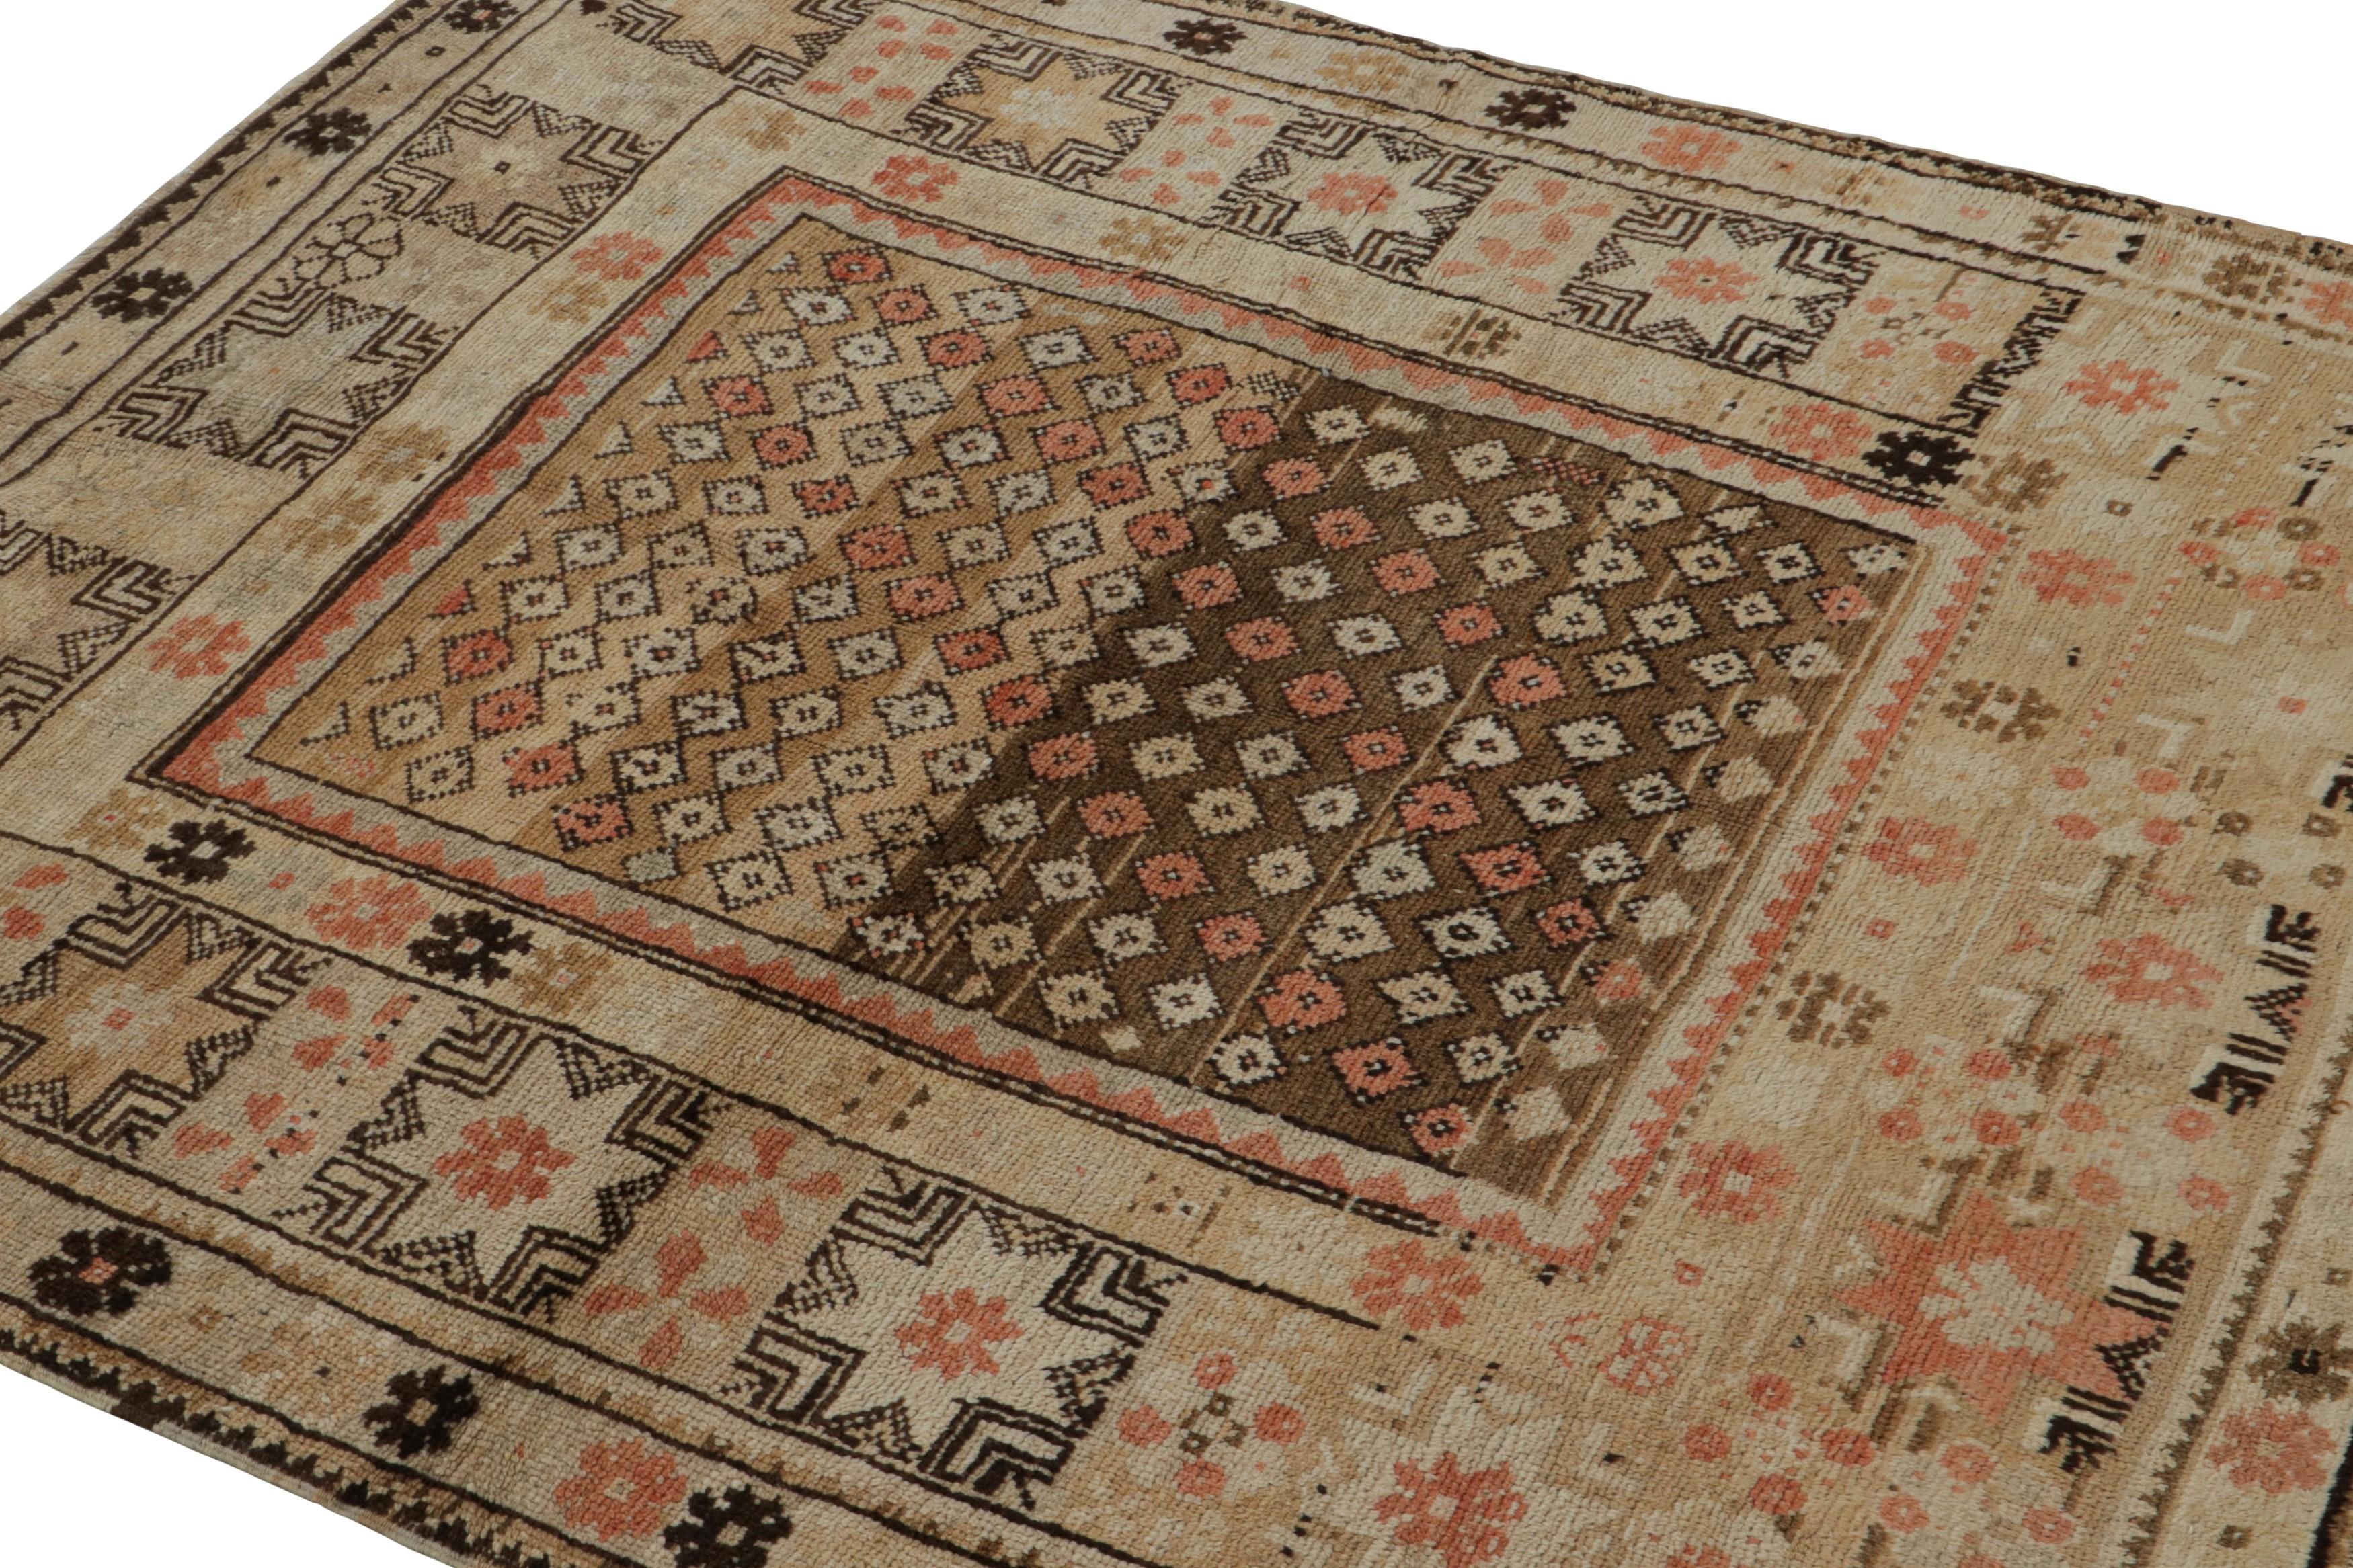 Handknotted in wool, this antique 4x5 Oushak rug originates circa 1880-1890 and is the latest to join Rug & Kilim’s Vintage & Antique collection.

On the Design:

This rug is an interesting tribal piece, and among the few scatter rugs we’ve curated